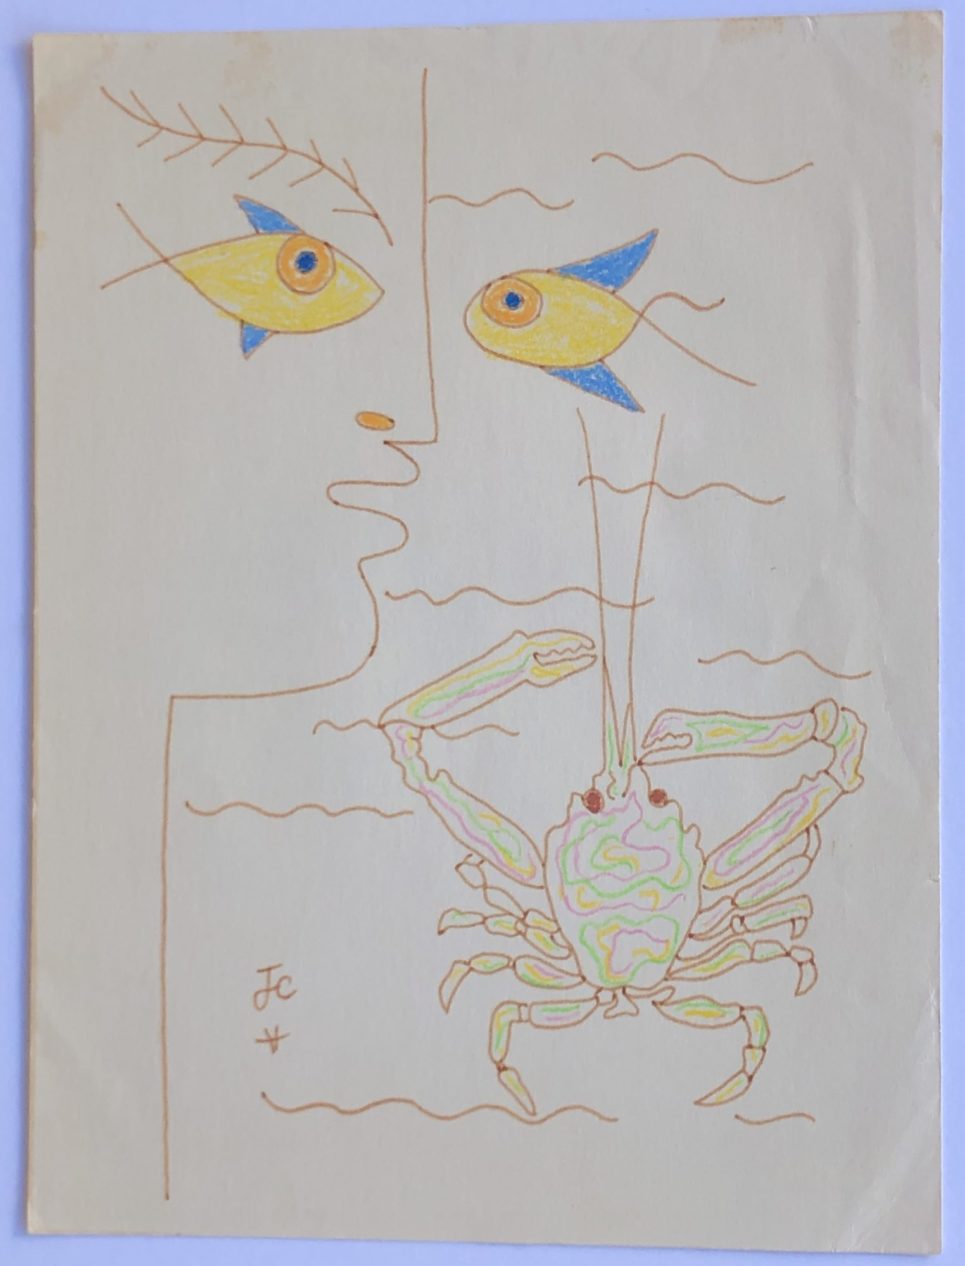 Jean Cocteau - Profile with Fish and Crab